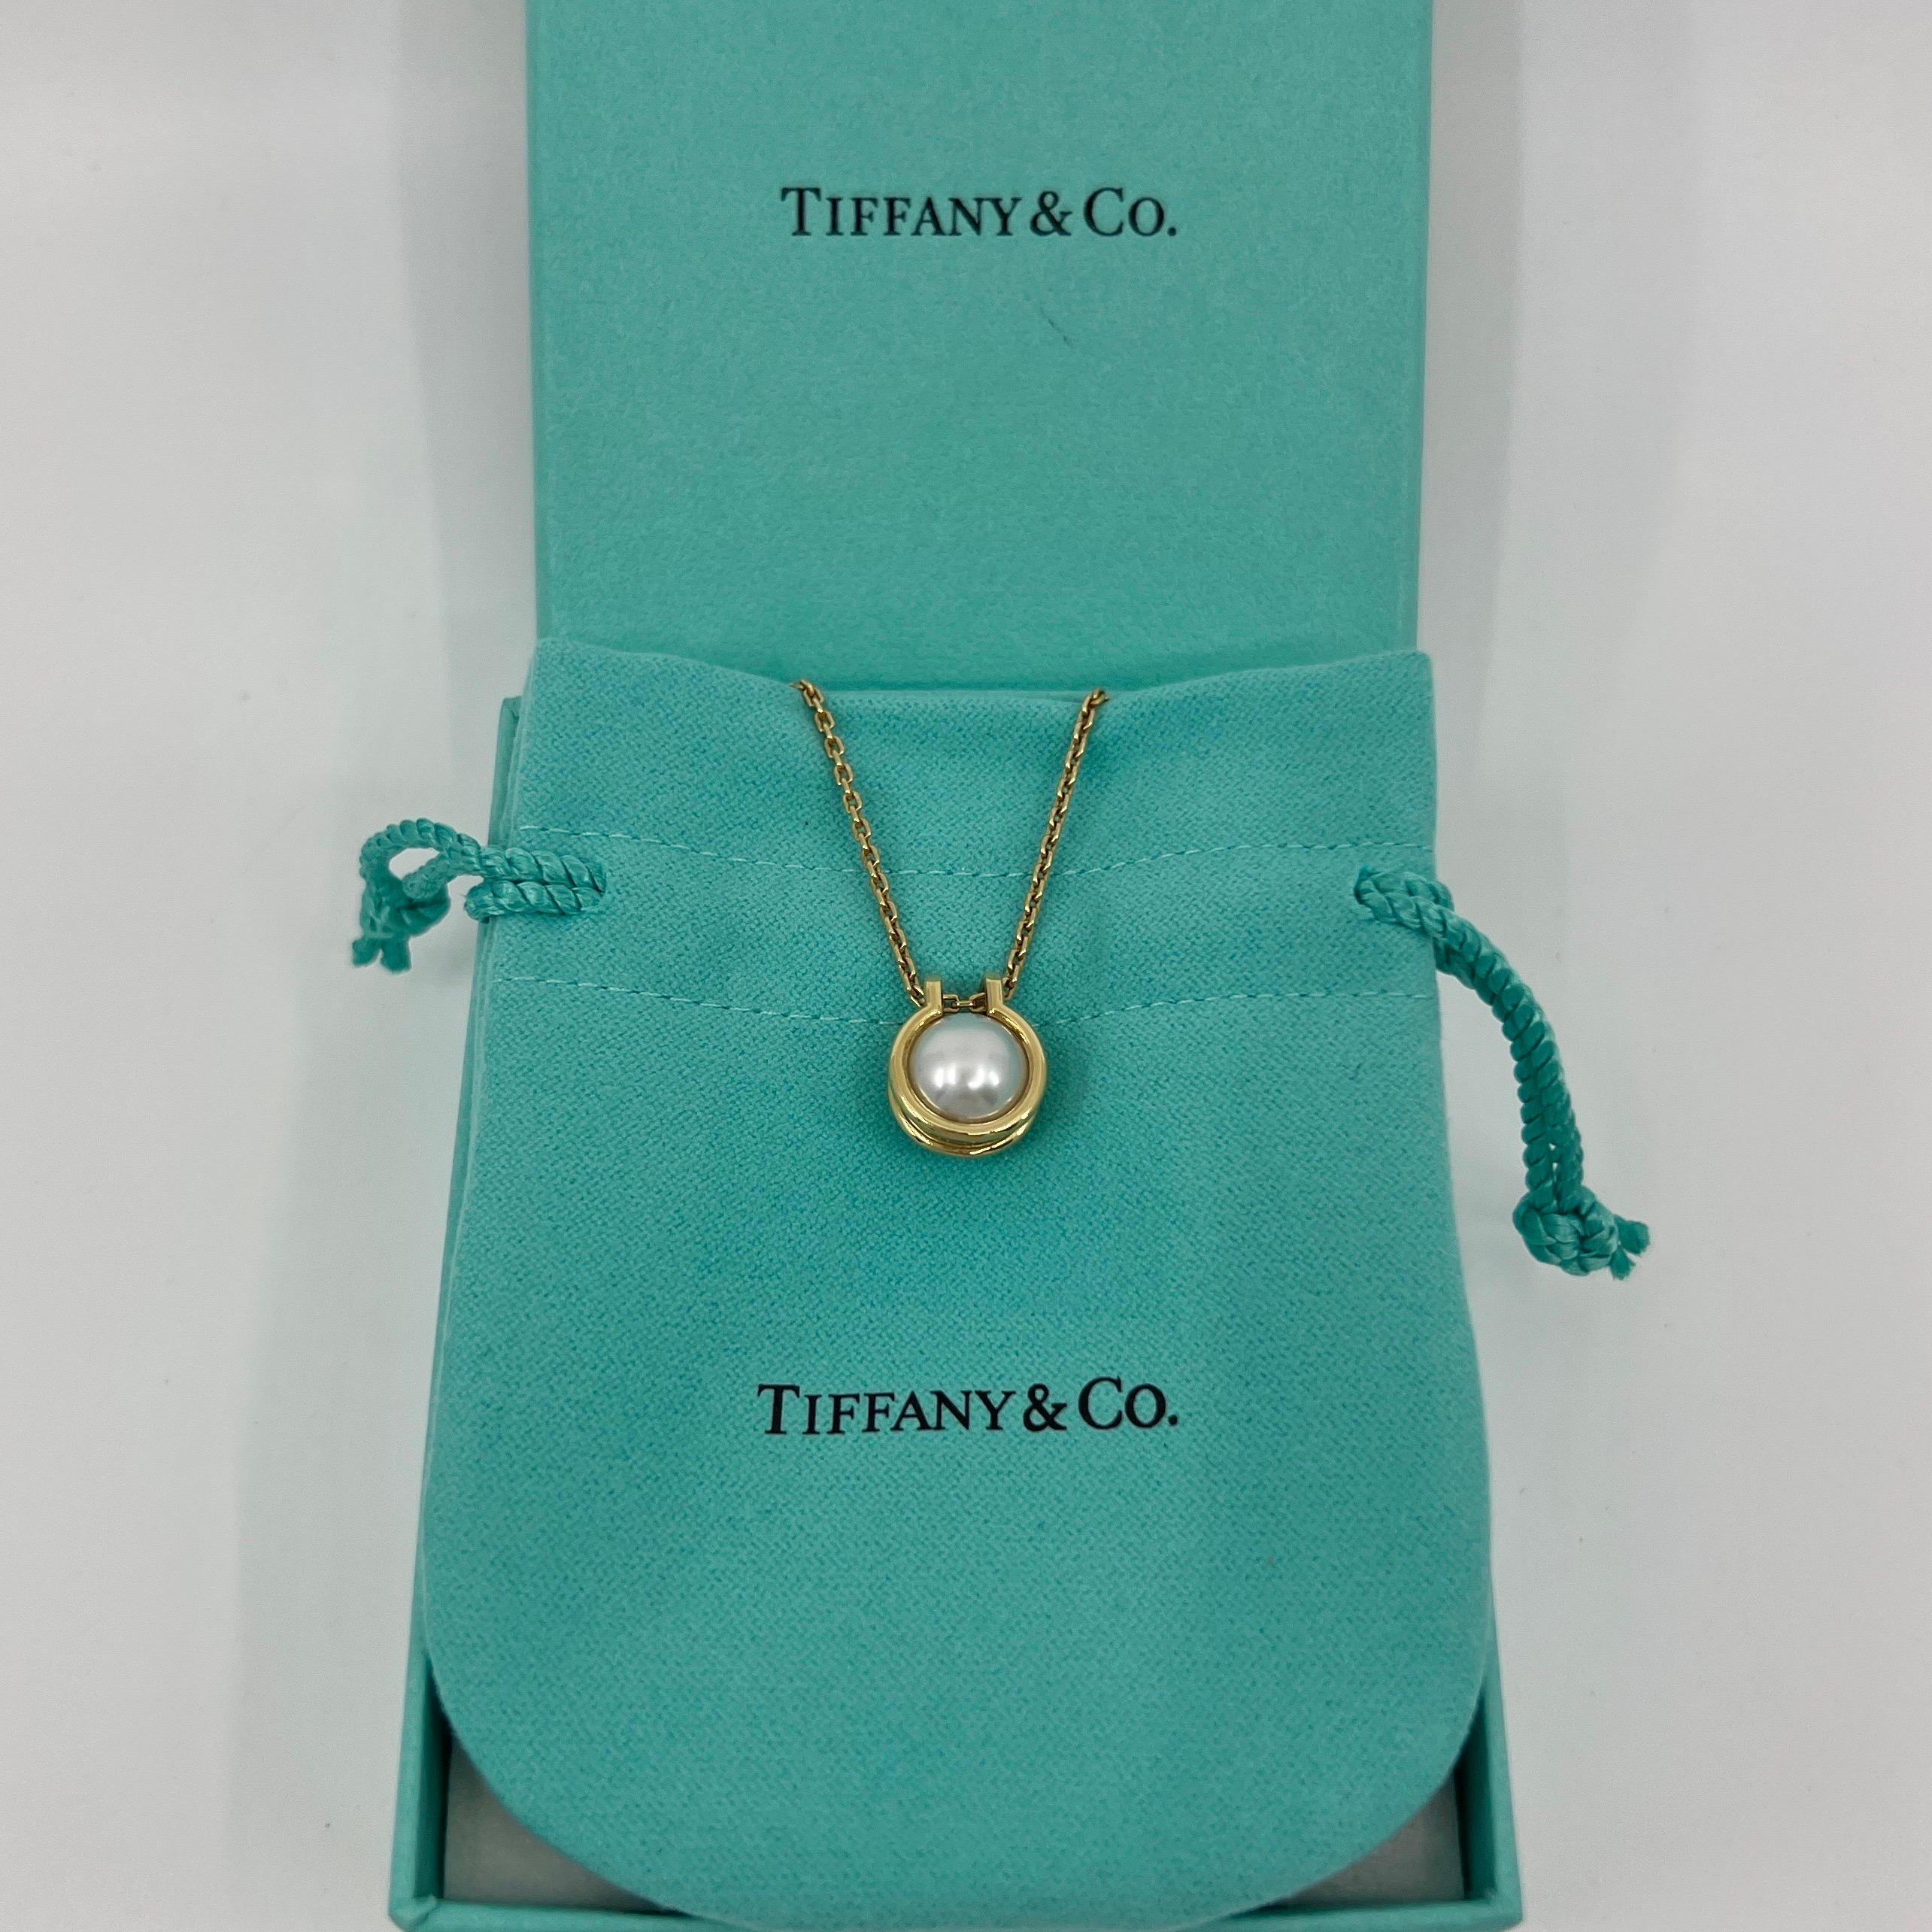 Rare Tiffany & Co. Hardwear White Freshwater Pearl 18k Yellow Gold Link Necklace For Sale 5